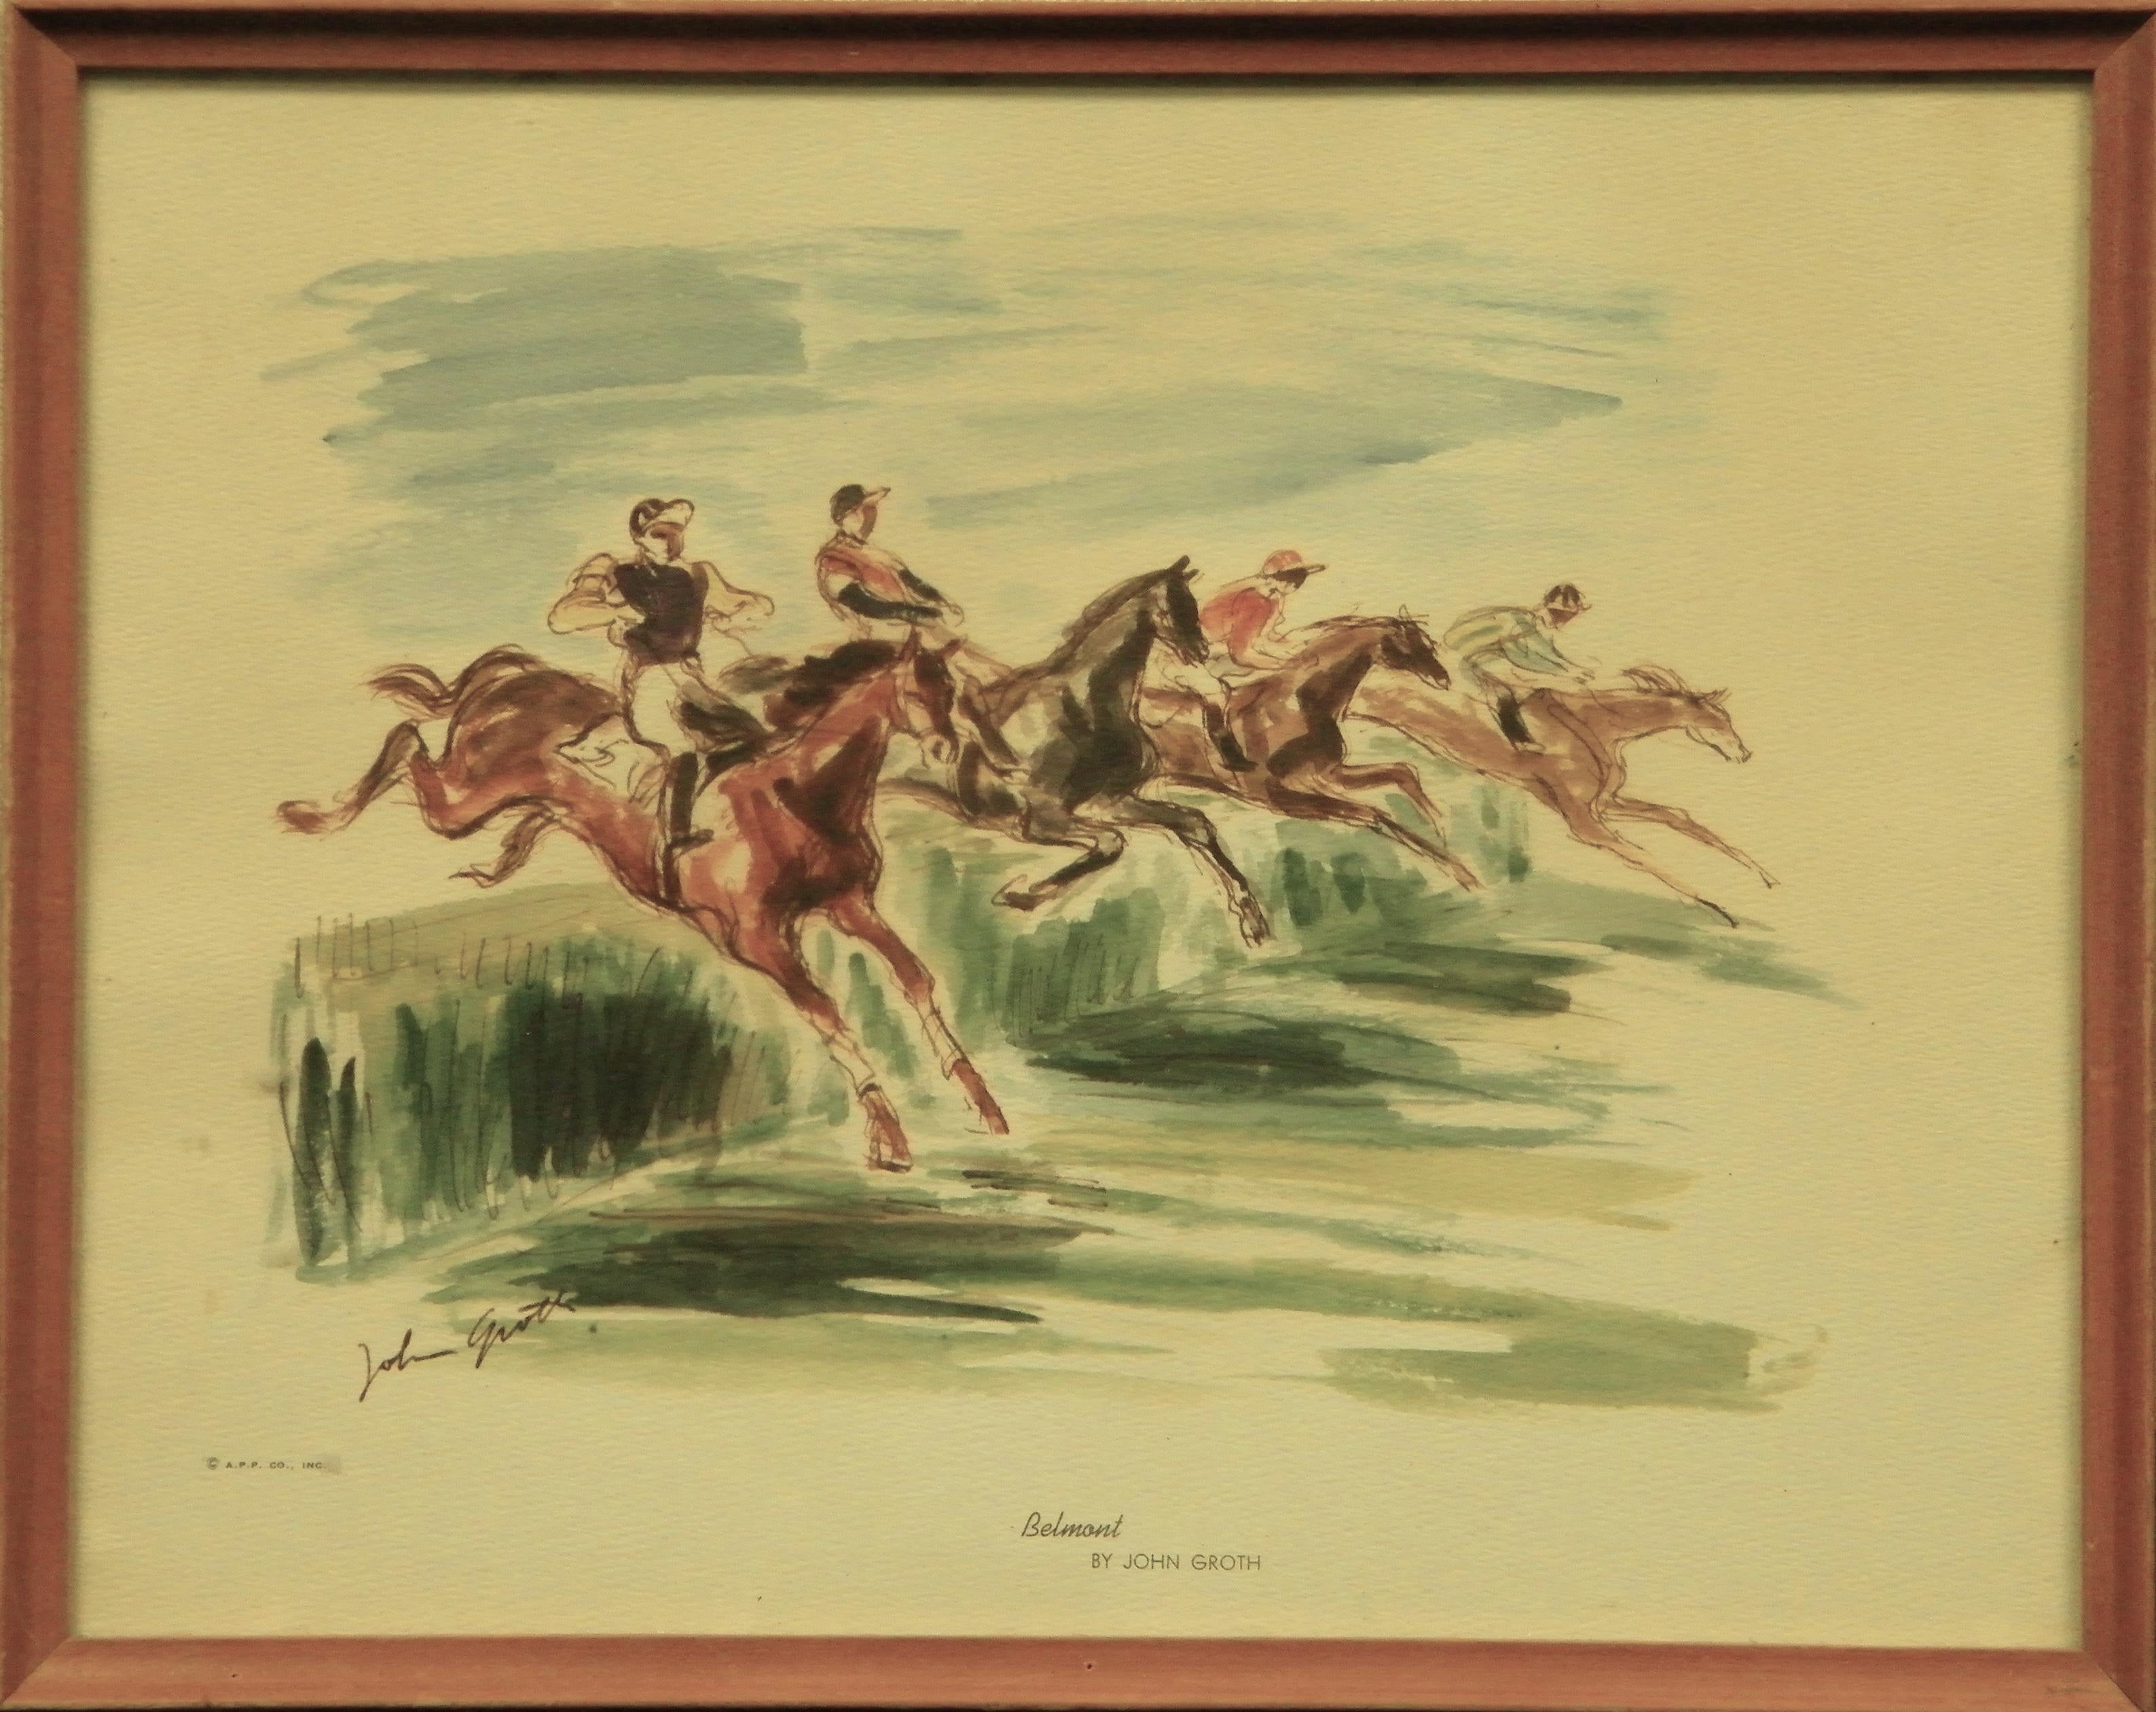 Classic color c1953 lithograph of four steeplechasers at 'Belmont Park' by John Groth (1908-1988)

Published by: Argosy Picture Publishing Co.

Print Sz: 10 5/8"H x 13 5/8"W

Frame Sz: 12"H x 15"W